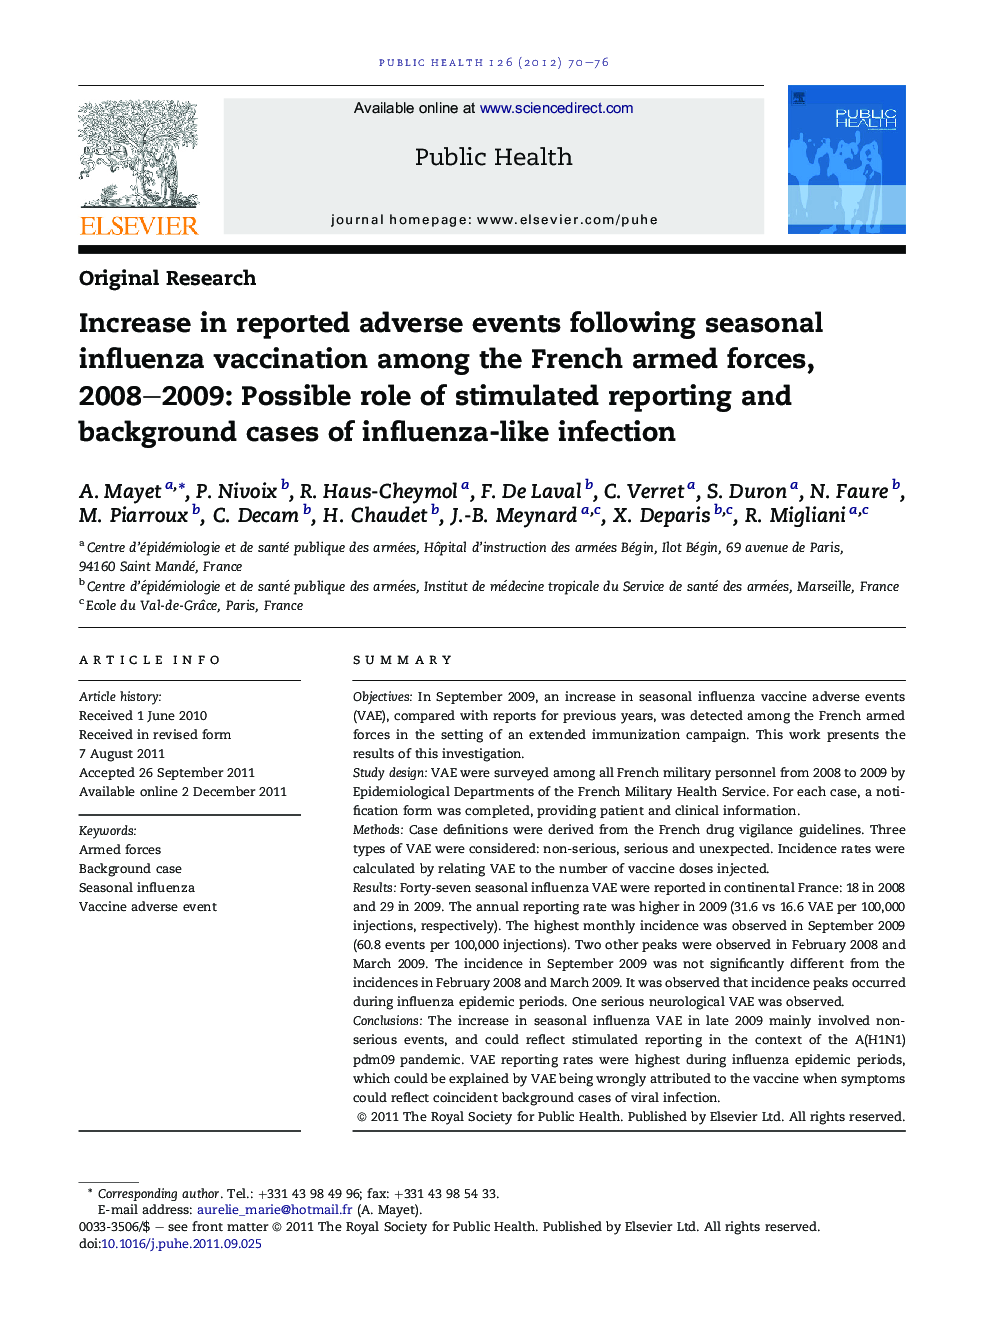 Increase in reported adverse events following seasonal influenza vaccination among the French armed forces, 2008-2009: Possible role of stimulated reporting and background cases of influenza-like infection